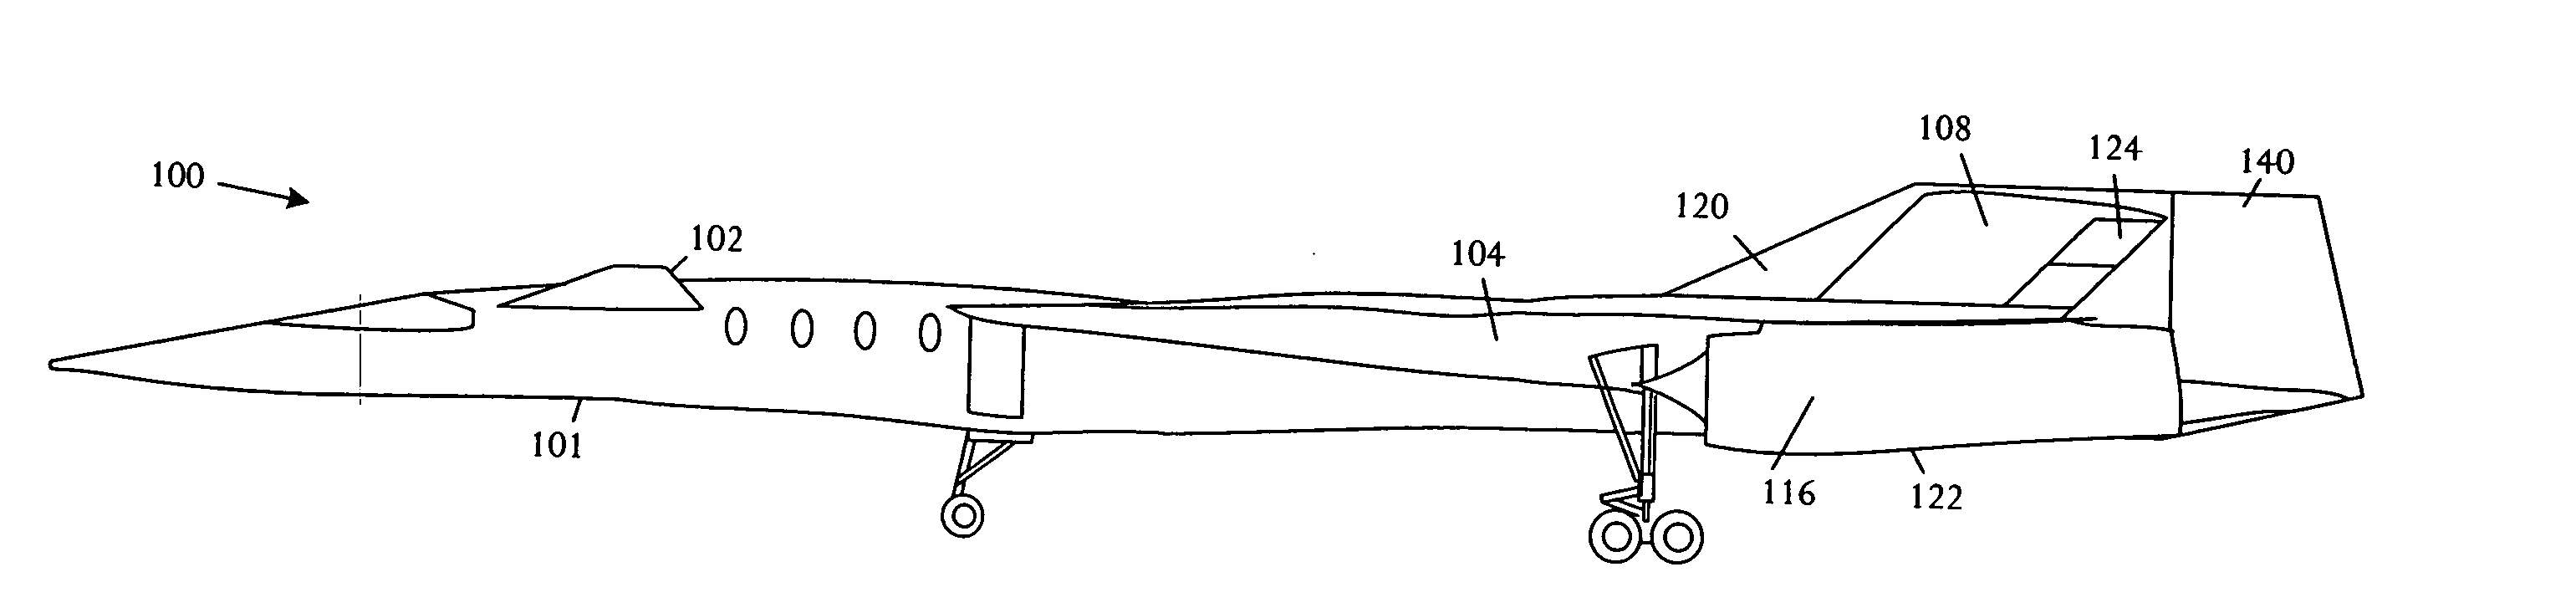 Canard position and dihedral for boom reduction and pitch/directional control